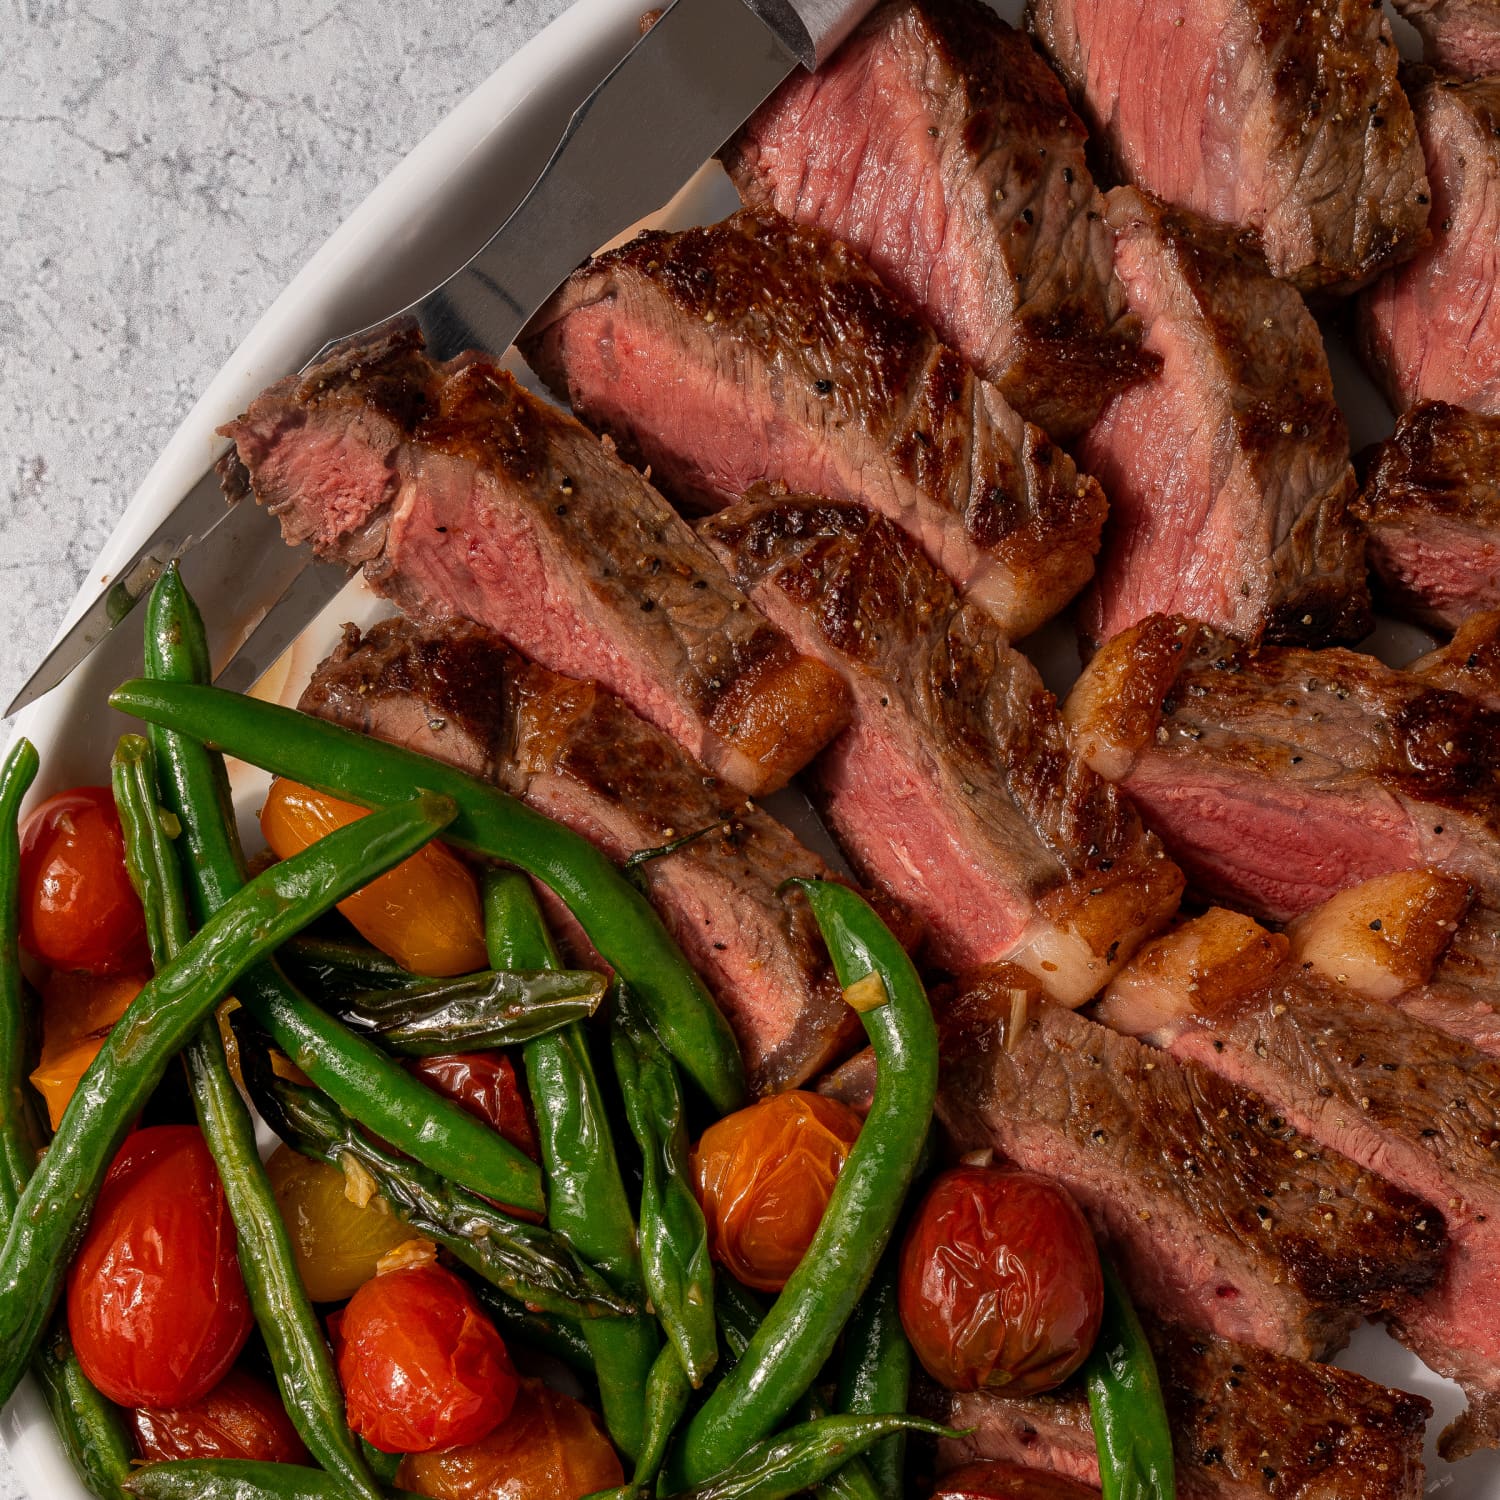 https://cdn.apartmenttherapy.info/image/upload/f_jpg,q_auto:eco,c_fill,g_auto,w_1500,ar_1:1/k%2FEdit%2F2022-06-New-York-Strip-Steak-with-Green-Beans-and-Blistered-Tomatoes%2FNY_Strip_Steak_2